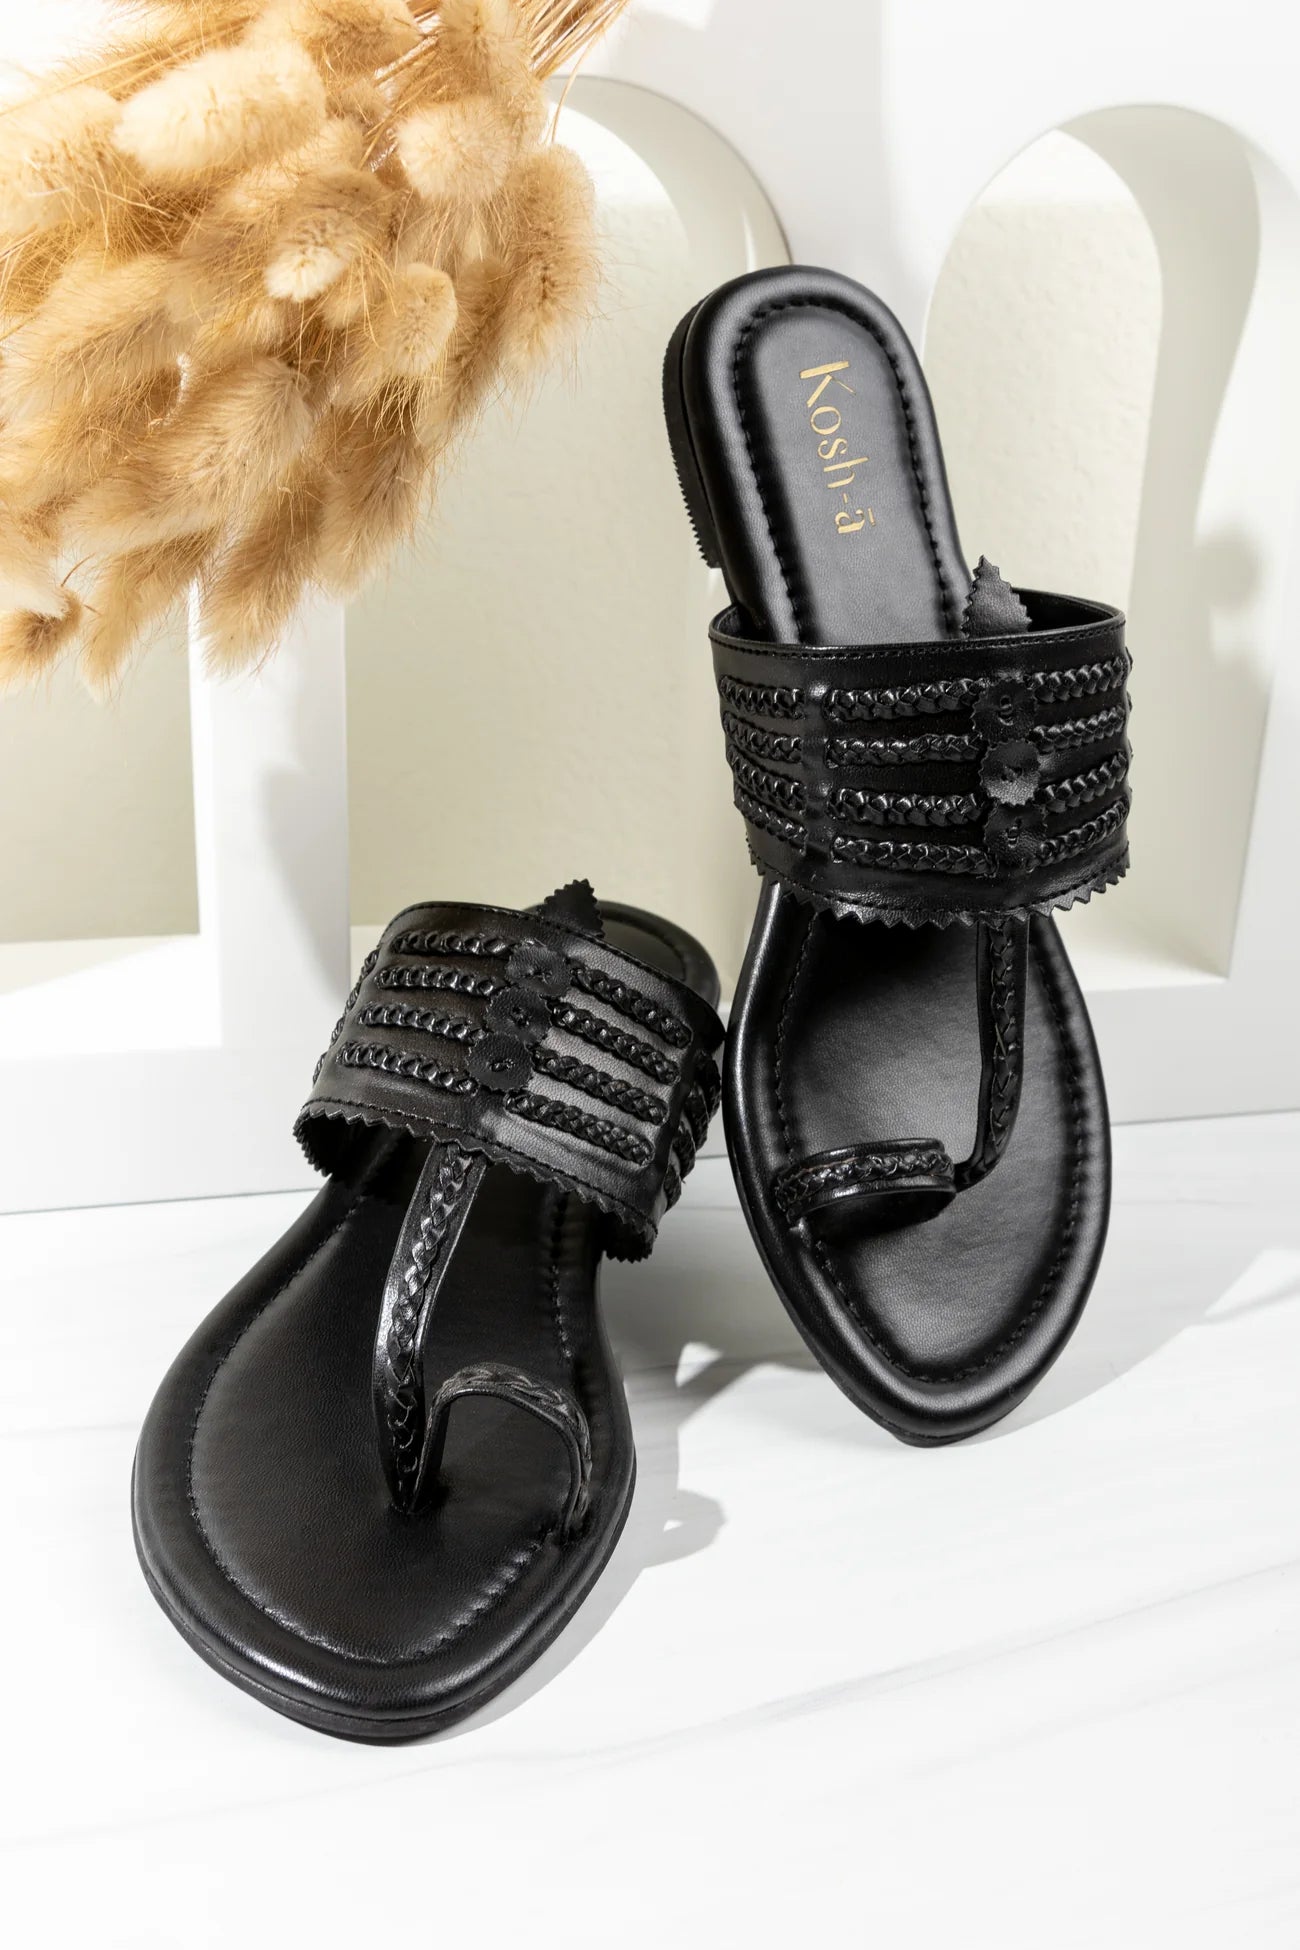 Black Flat Sandals For Women in USA by Kosh-a